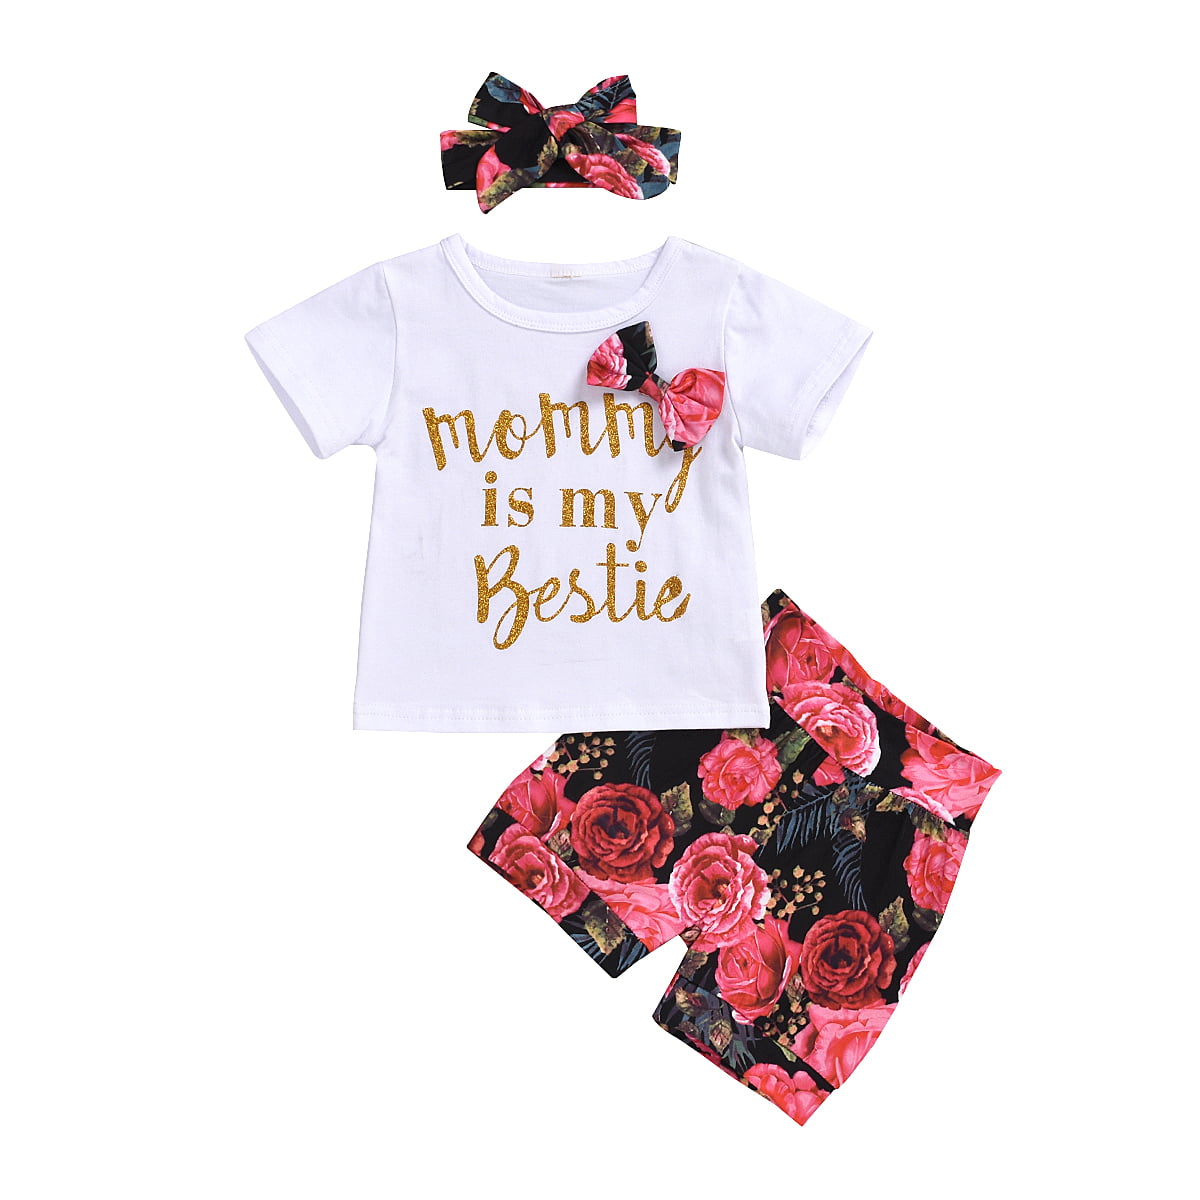 Newborn Baby Kid Girl Short Sleeve T-shirt Tops+Floral Pants Outfits Clothes Set 